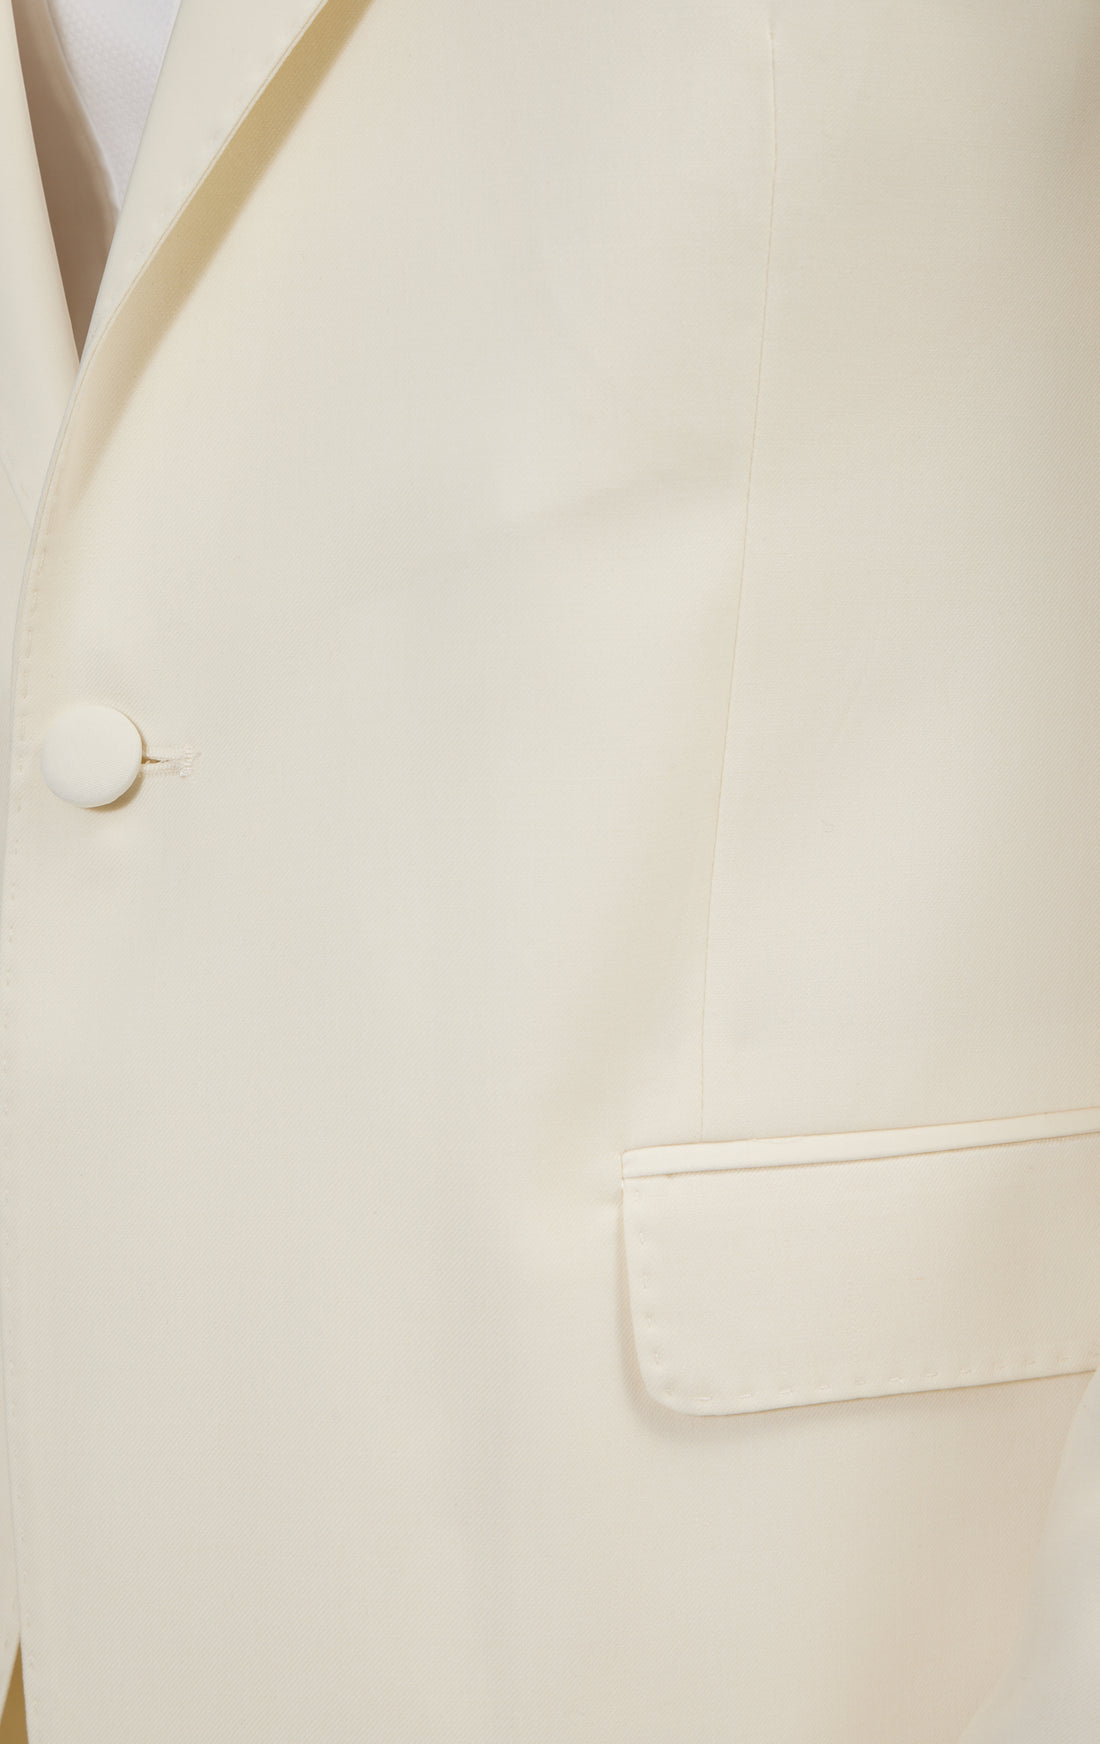 N° R273 SUPER 180S WOOL SINGLE BREASTED TUXEDO SUIT - WHITE